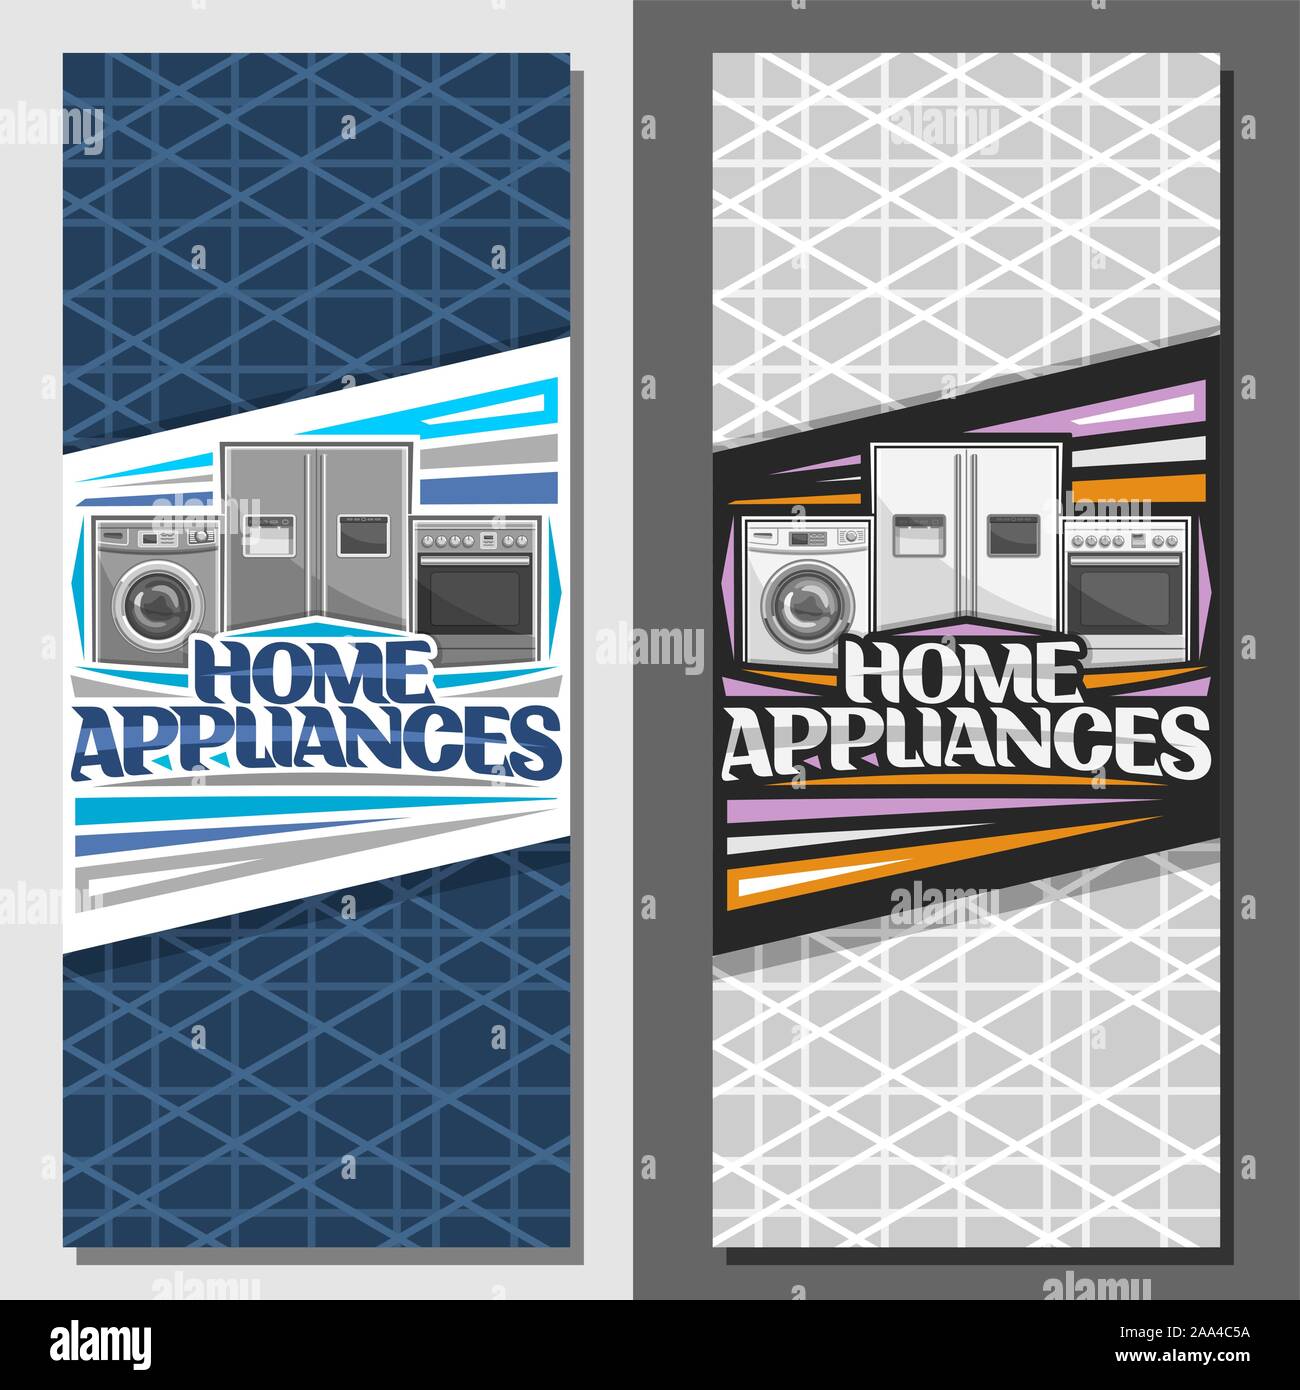 Vector layouts for Home Appliances, signage with illustration of washing machine, large fridge with screen, electric cooker, original lettering for wo Stock Vector